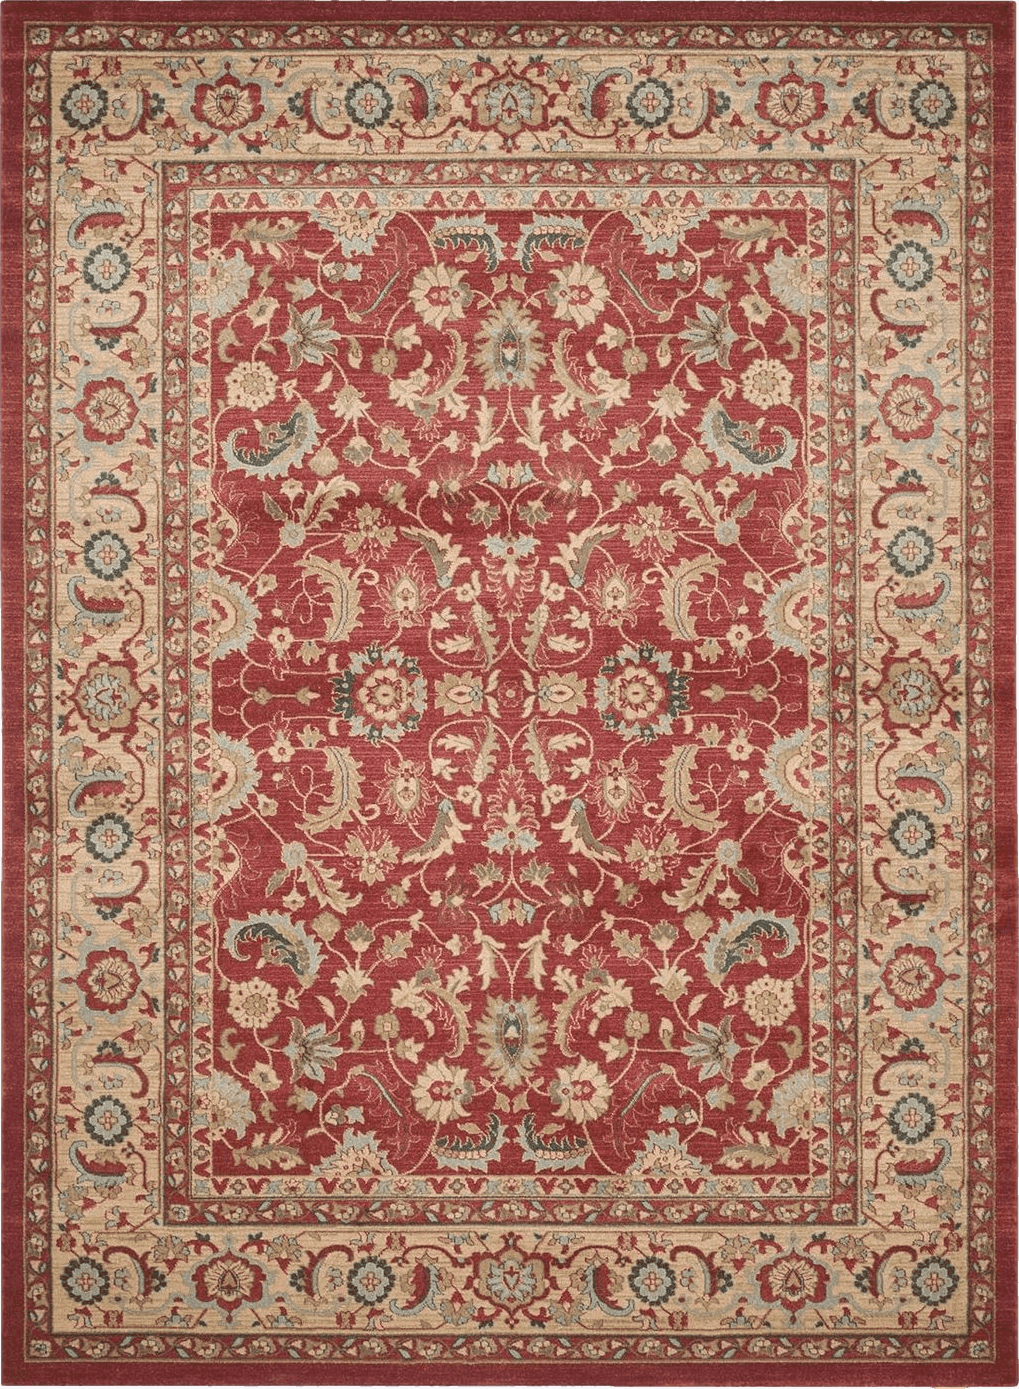 Area Oversized SAFAVIEH Mahal Collection Area Rug - 10' x 14', Red & Natural, Traditional Oriental Design, Non-Shedding & Easy Care, Ideal for High Traffic Areas in Living Room, Bedroom (MAH699A)